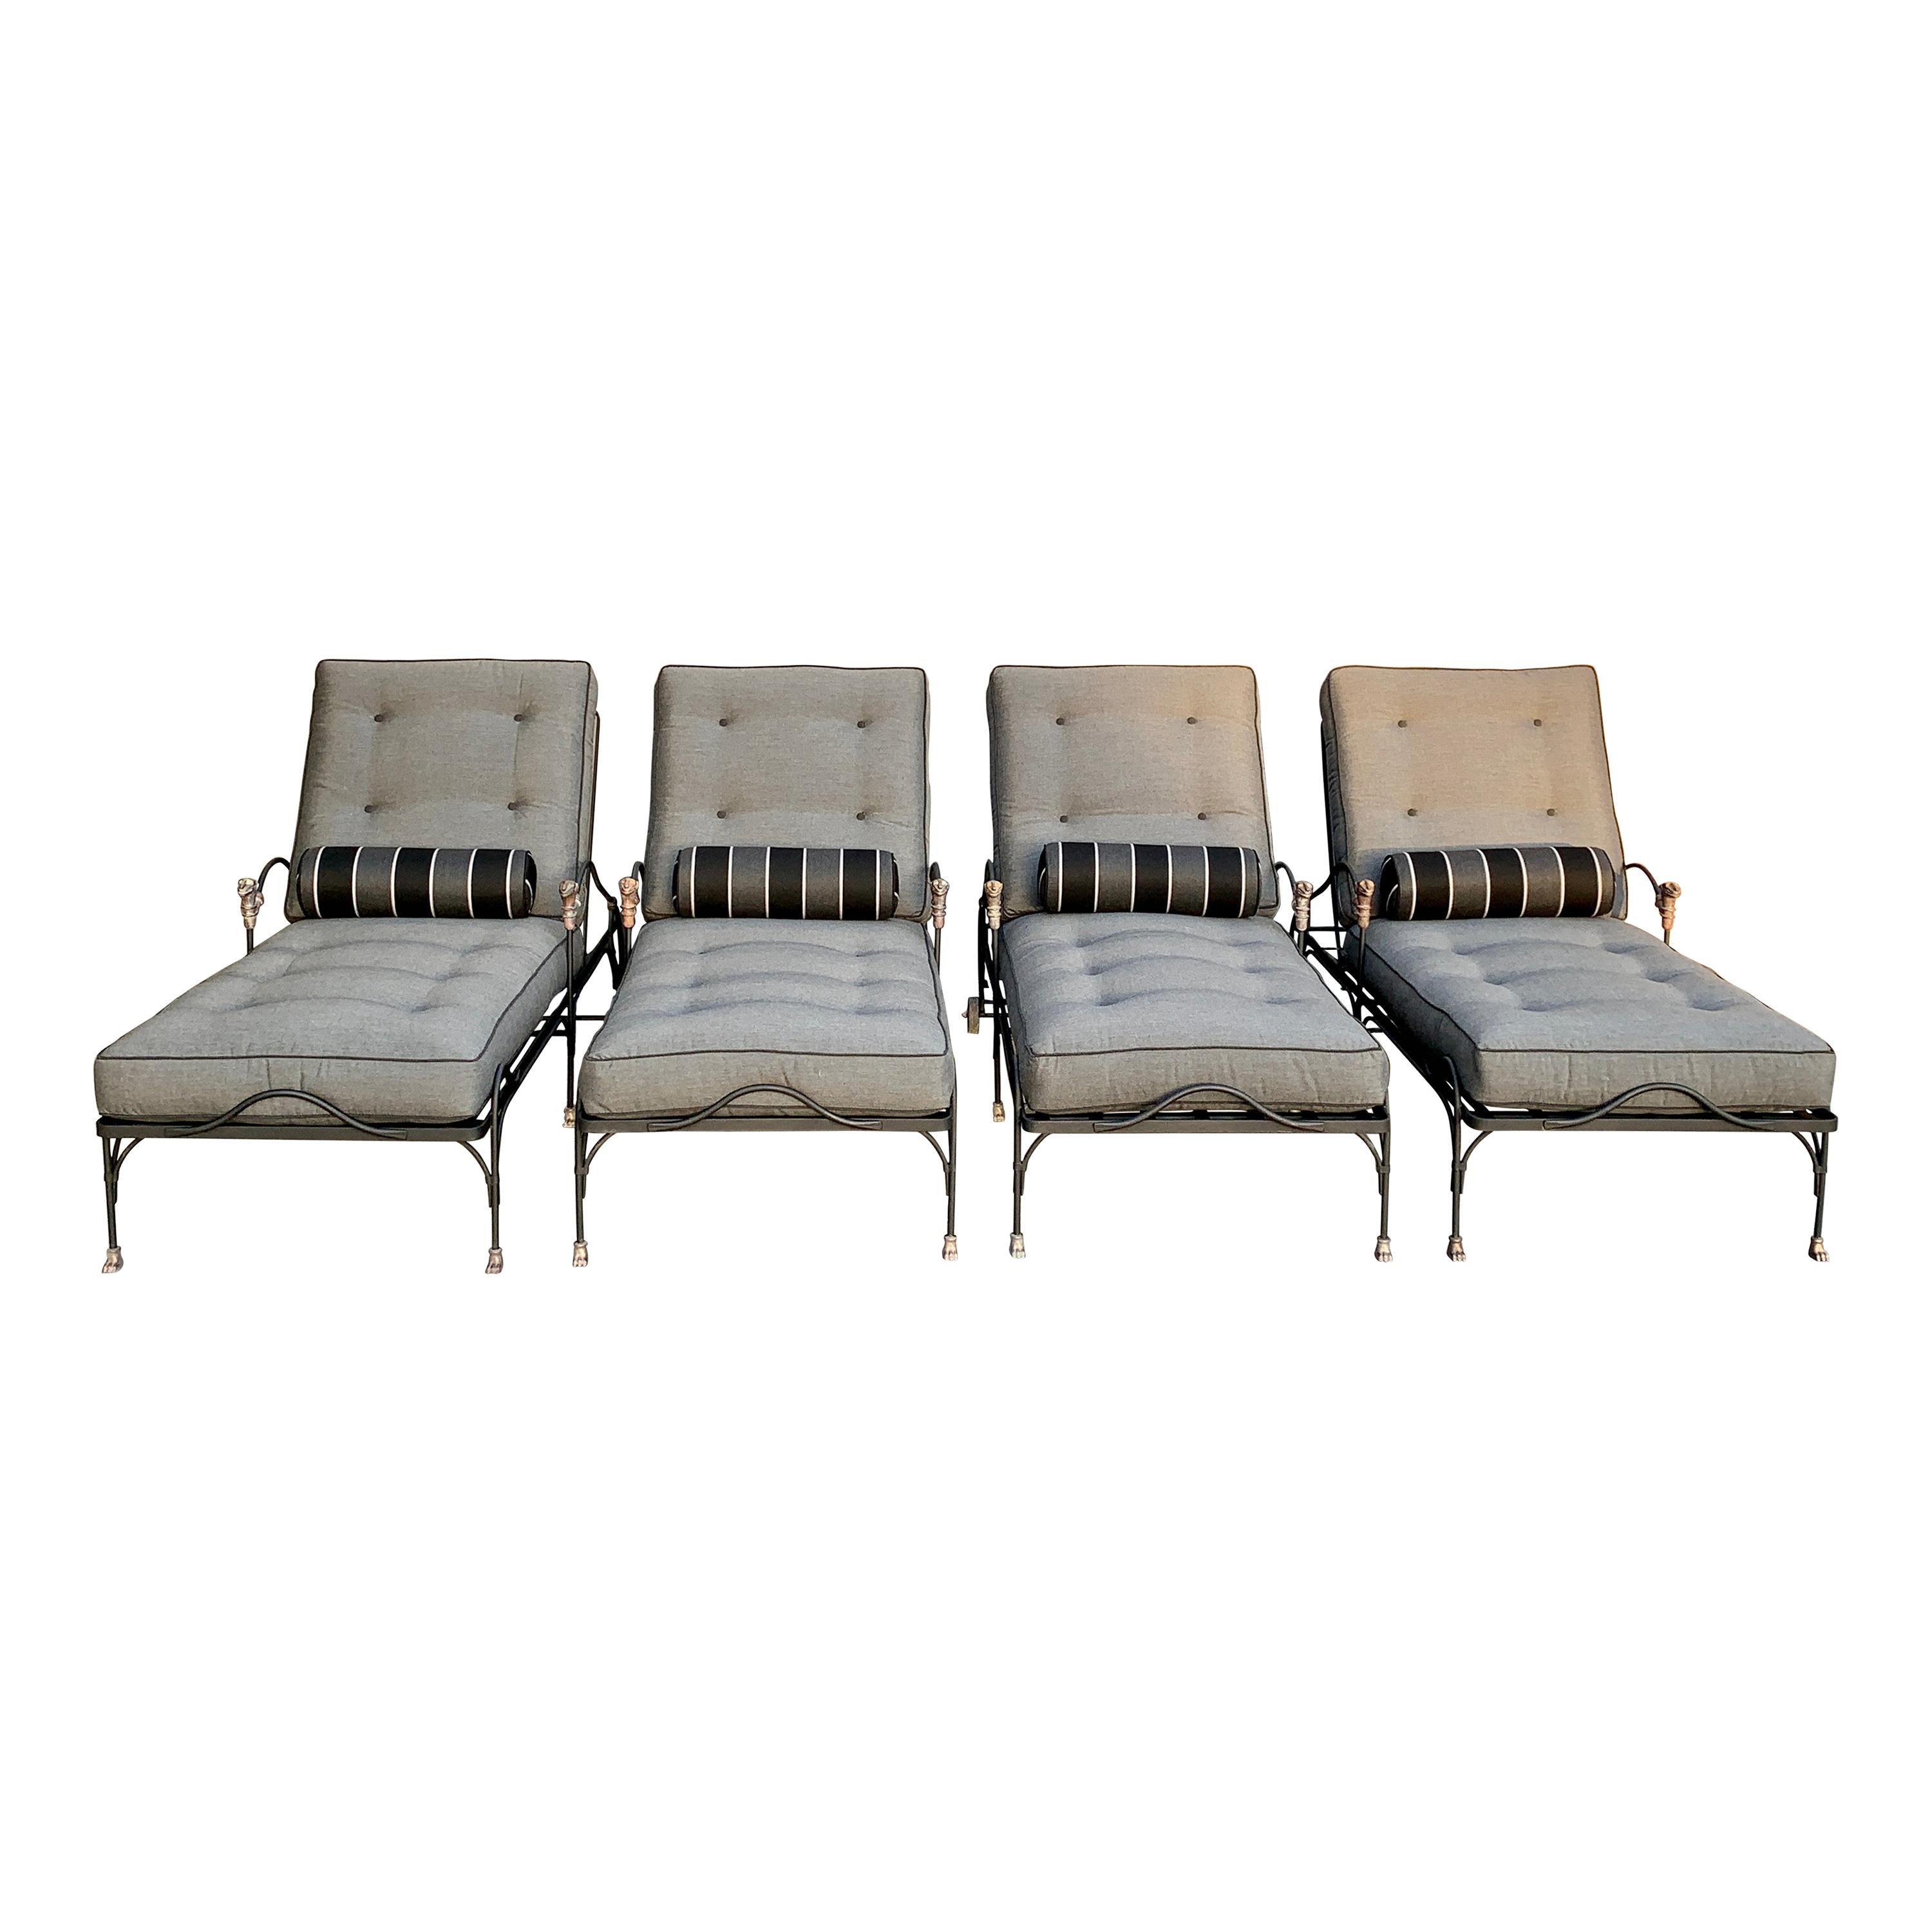 Four phenomenally designed outdoor wrought iron chaise lounges with sculpted head, paw feet and wheels sculpted of statuary bronze. The thoughtful design of the lounges has a curved handle at the base and head of the lounge for ease of movement. The